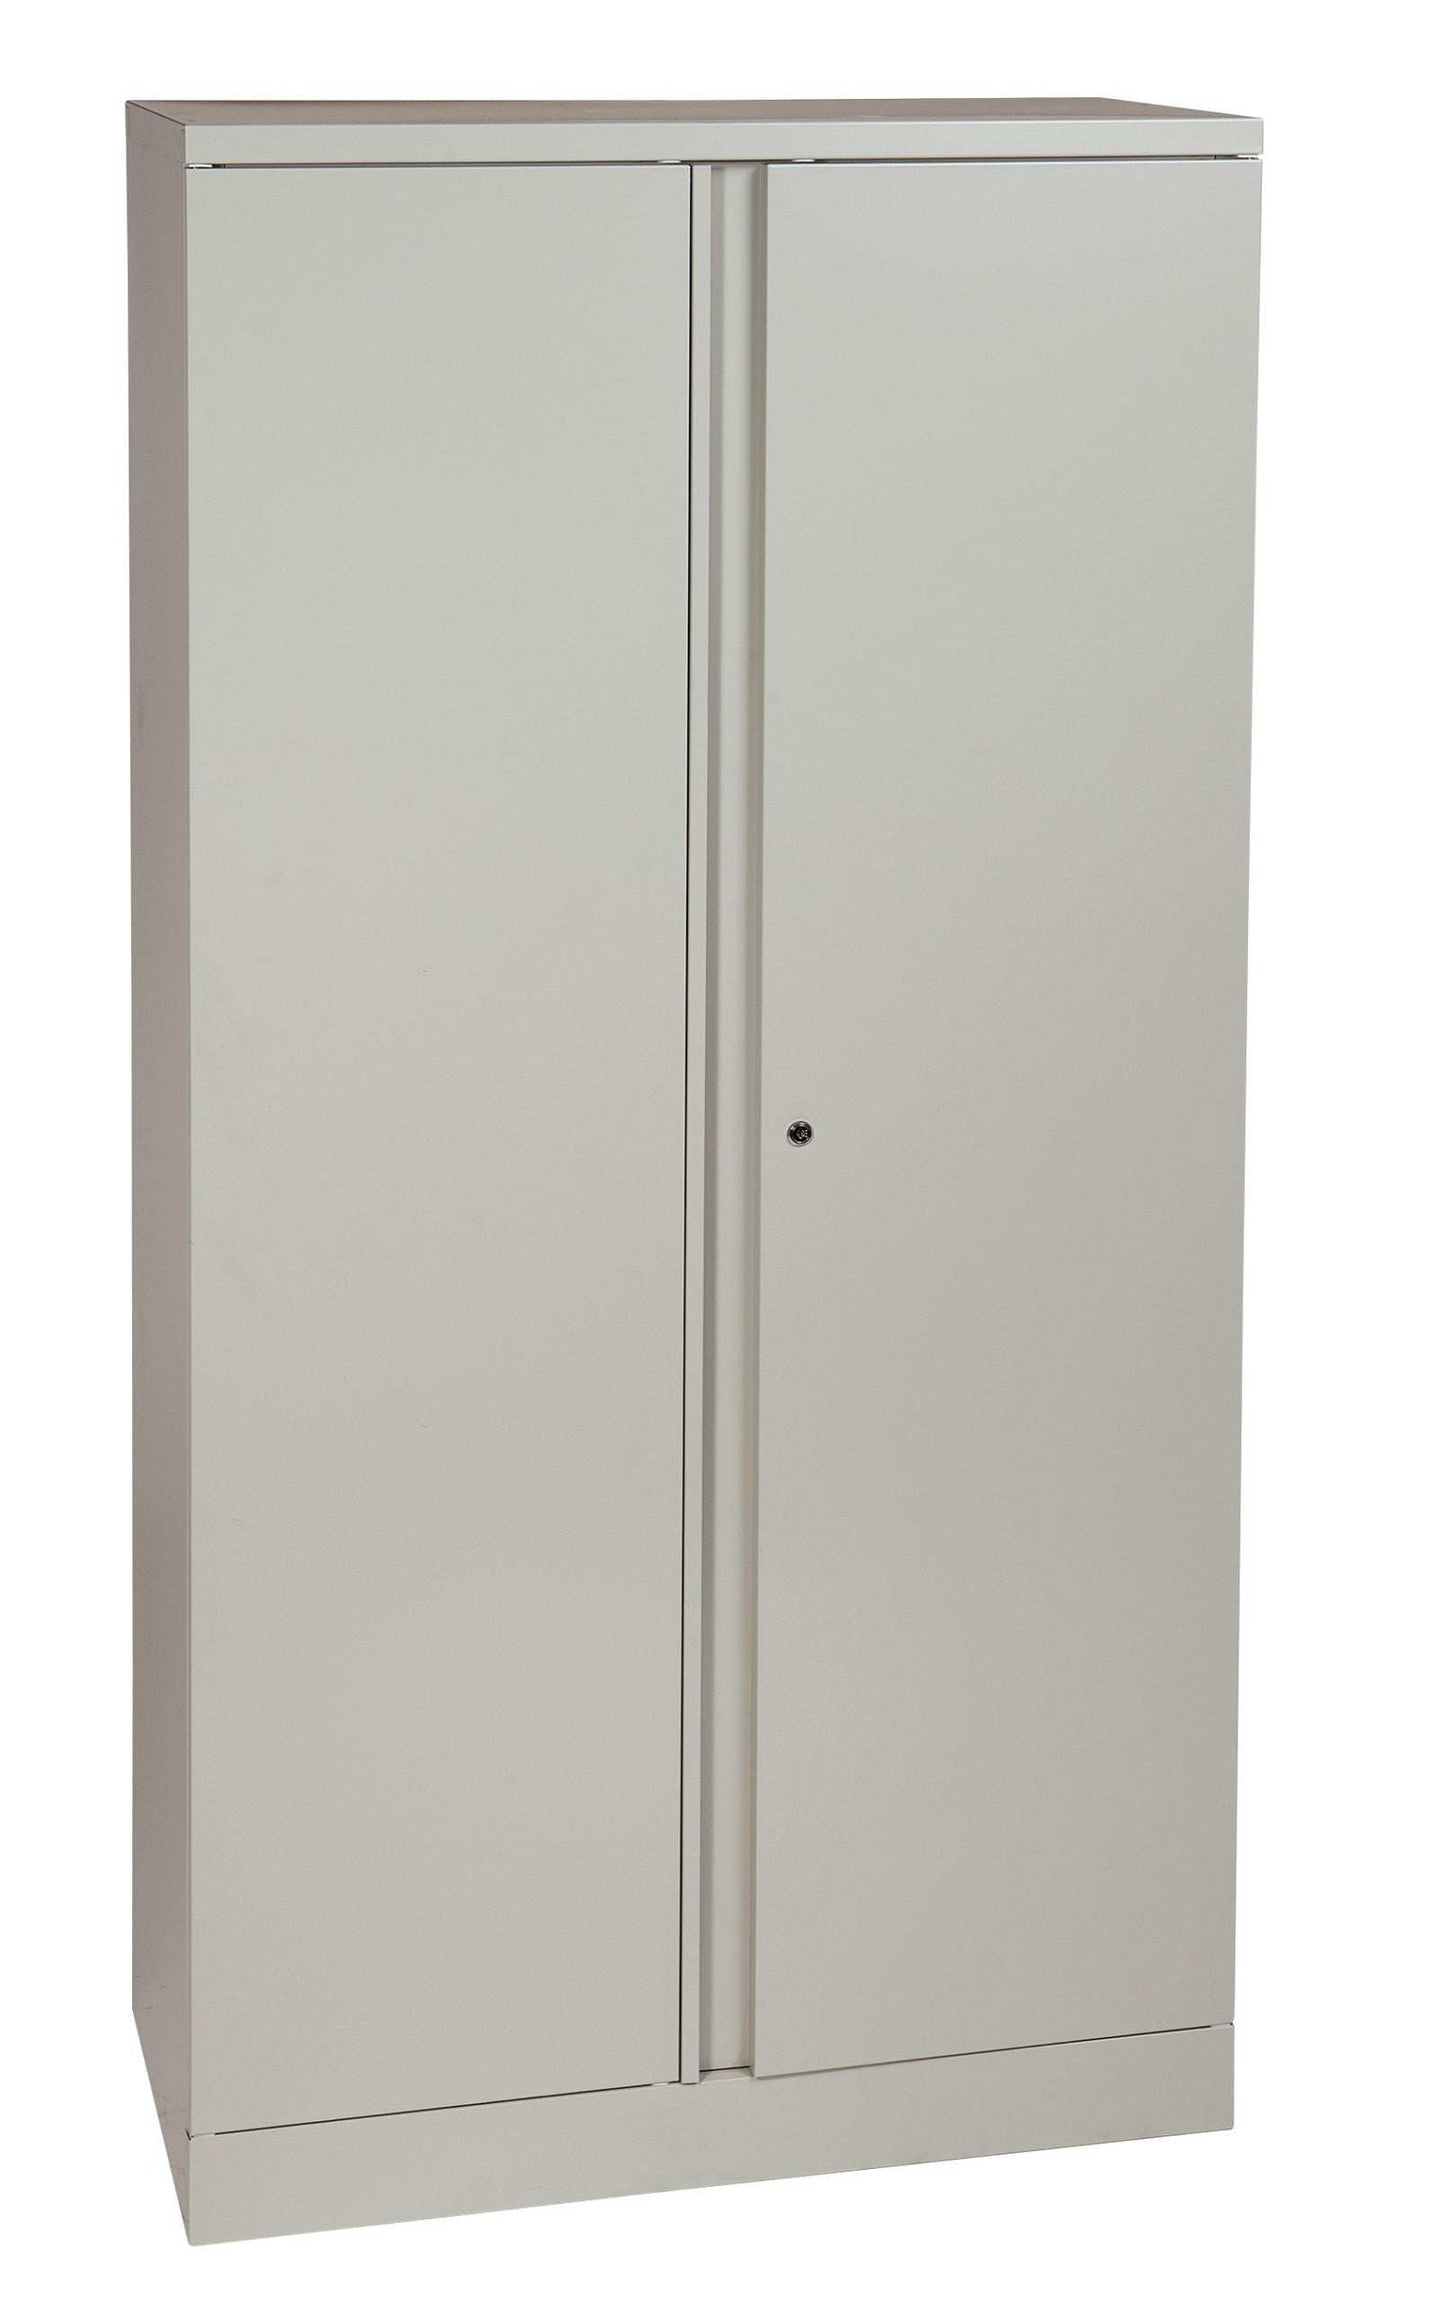 New 72"H Metal Storage Cabinet by Office Star